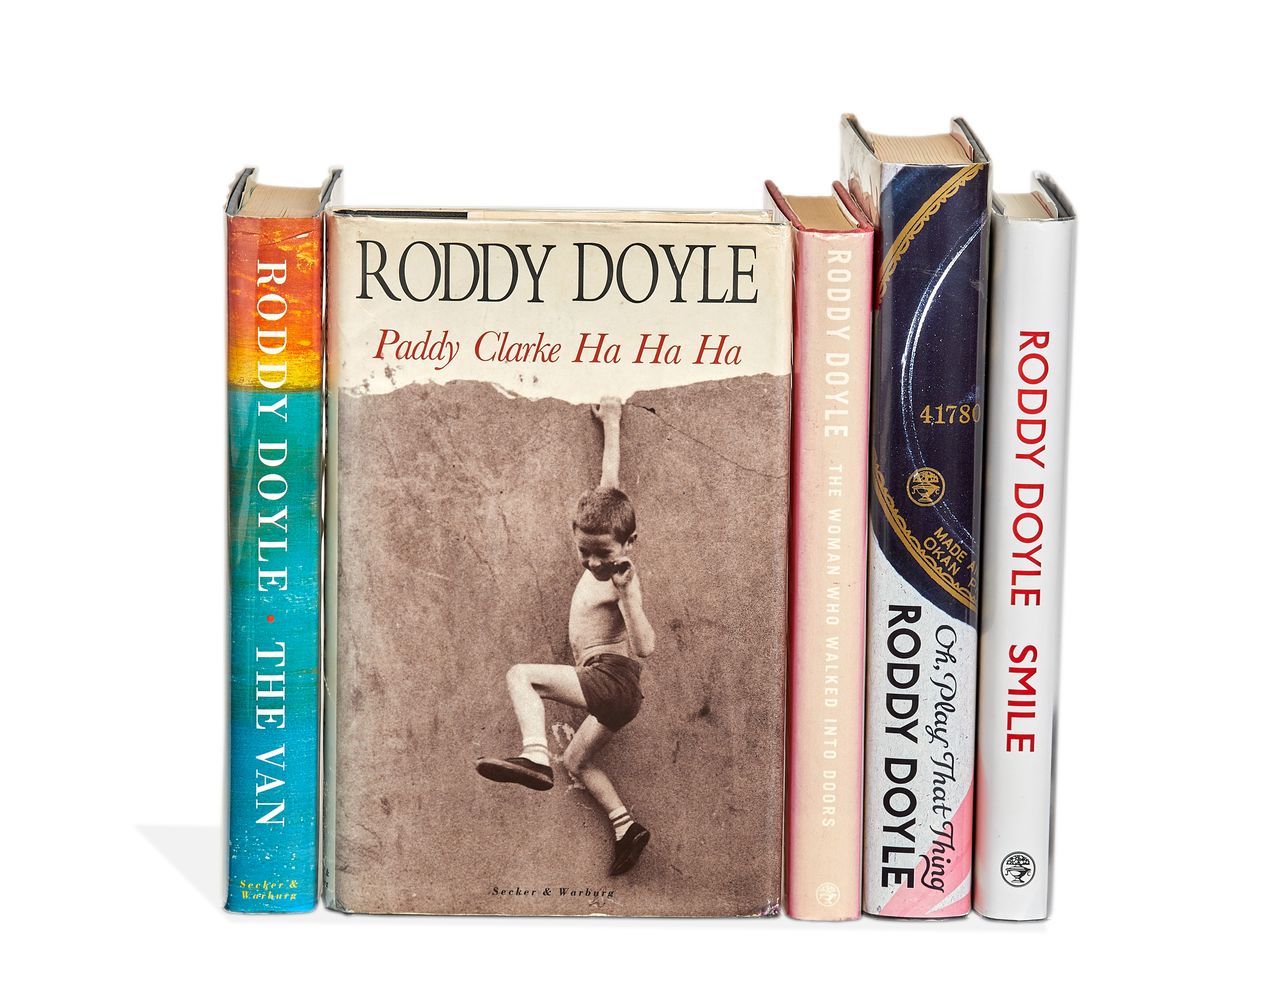 Roddy Doyle, Works, first editions signed by the author [UK, 1991-2017]